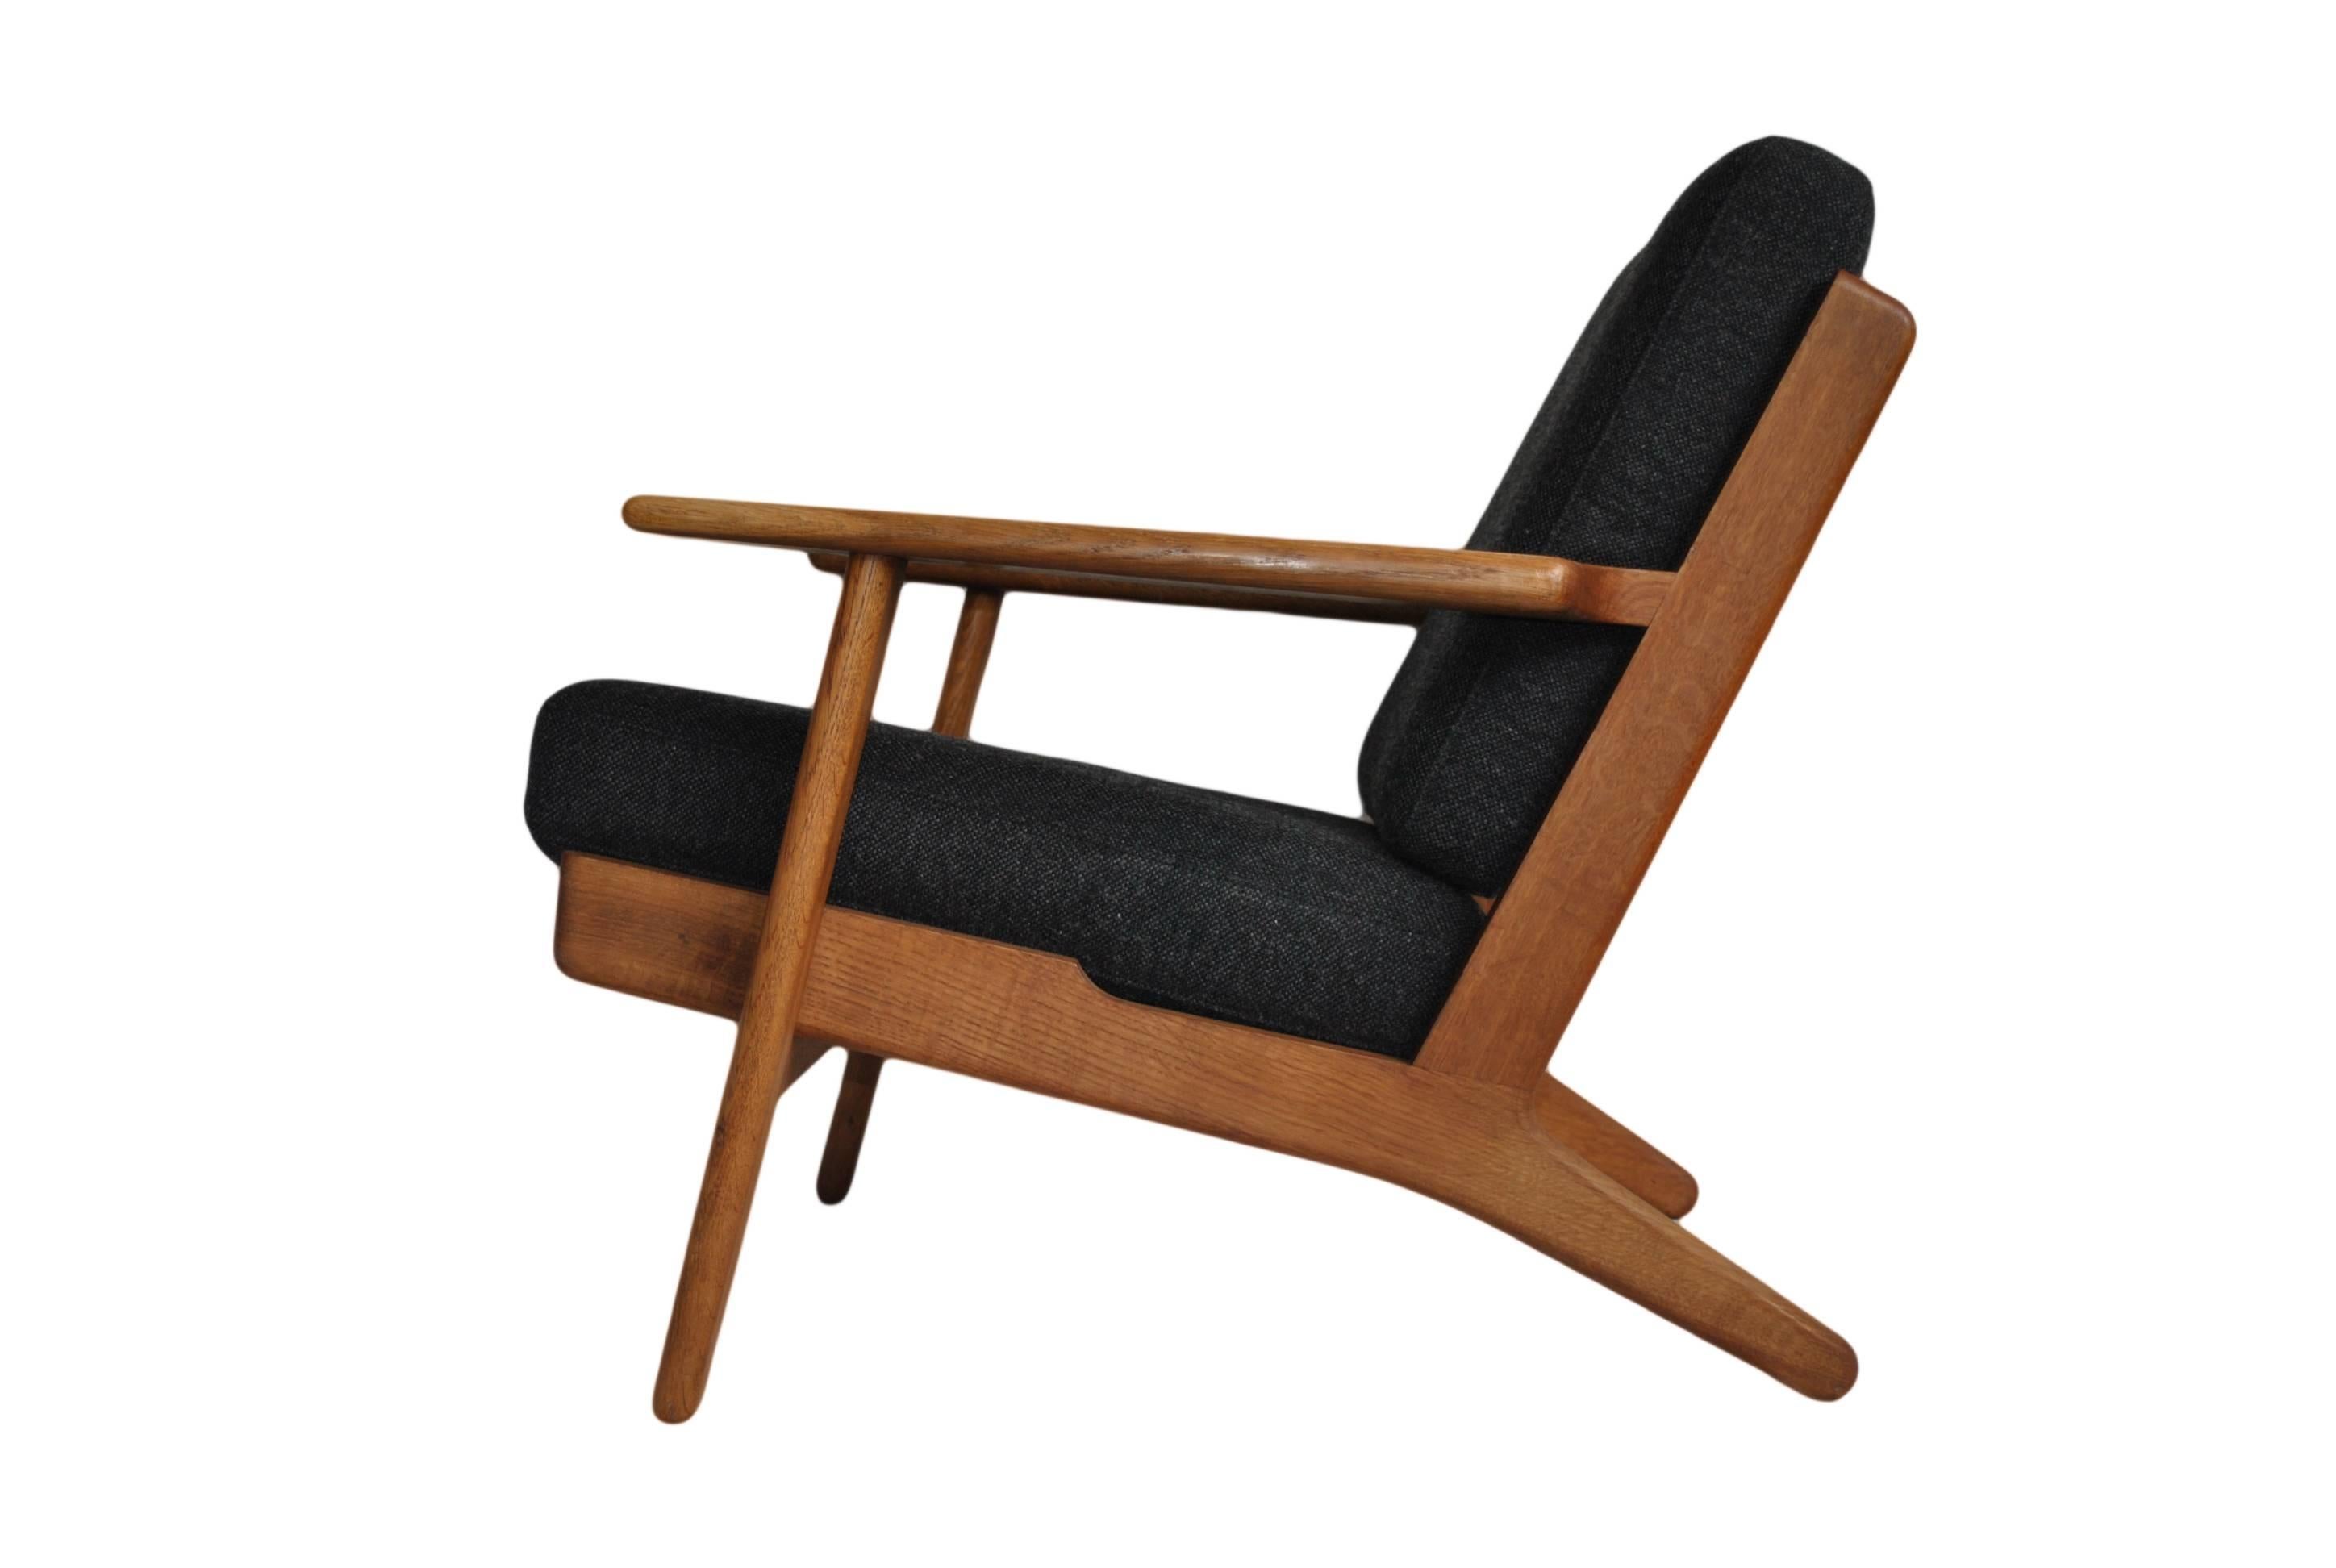 Early oak version of Hans Wegners ge290 design for GETAMA. Produced in Denmark circa 1955. Repolished frame and completely re-upholstered in charcoal cotton weave. Original makers marks intact. Custom upholstery available.
Pair listed but can be